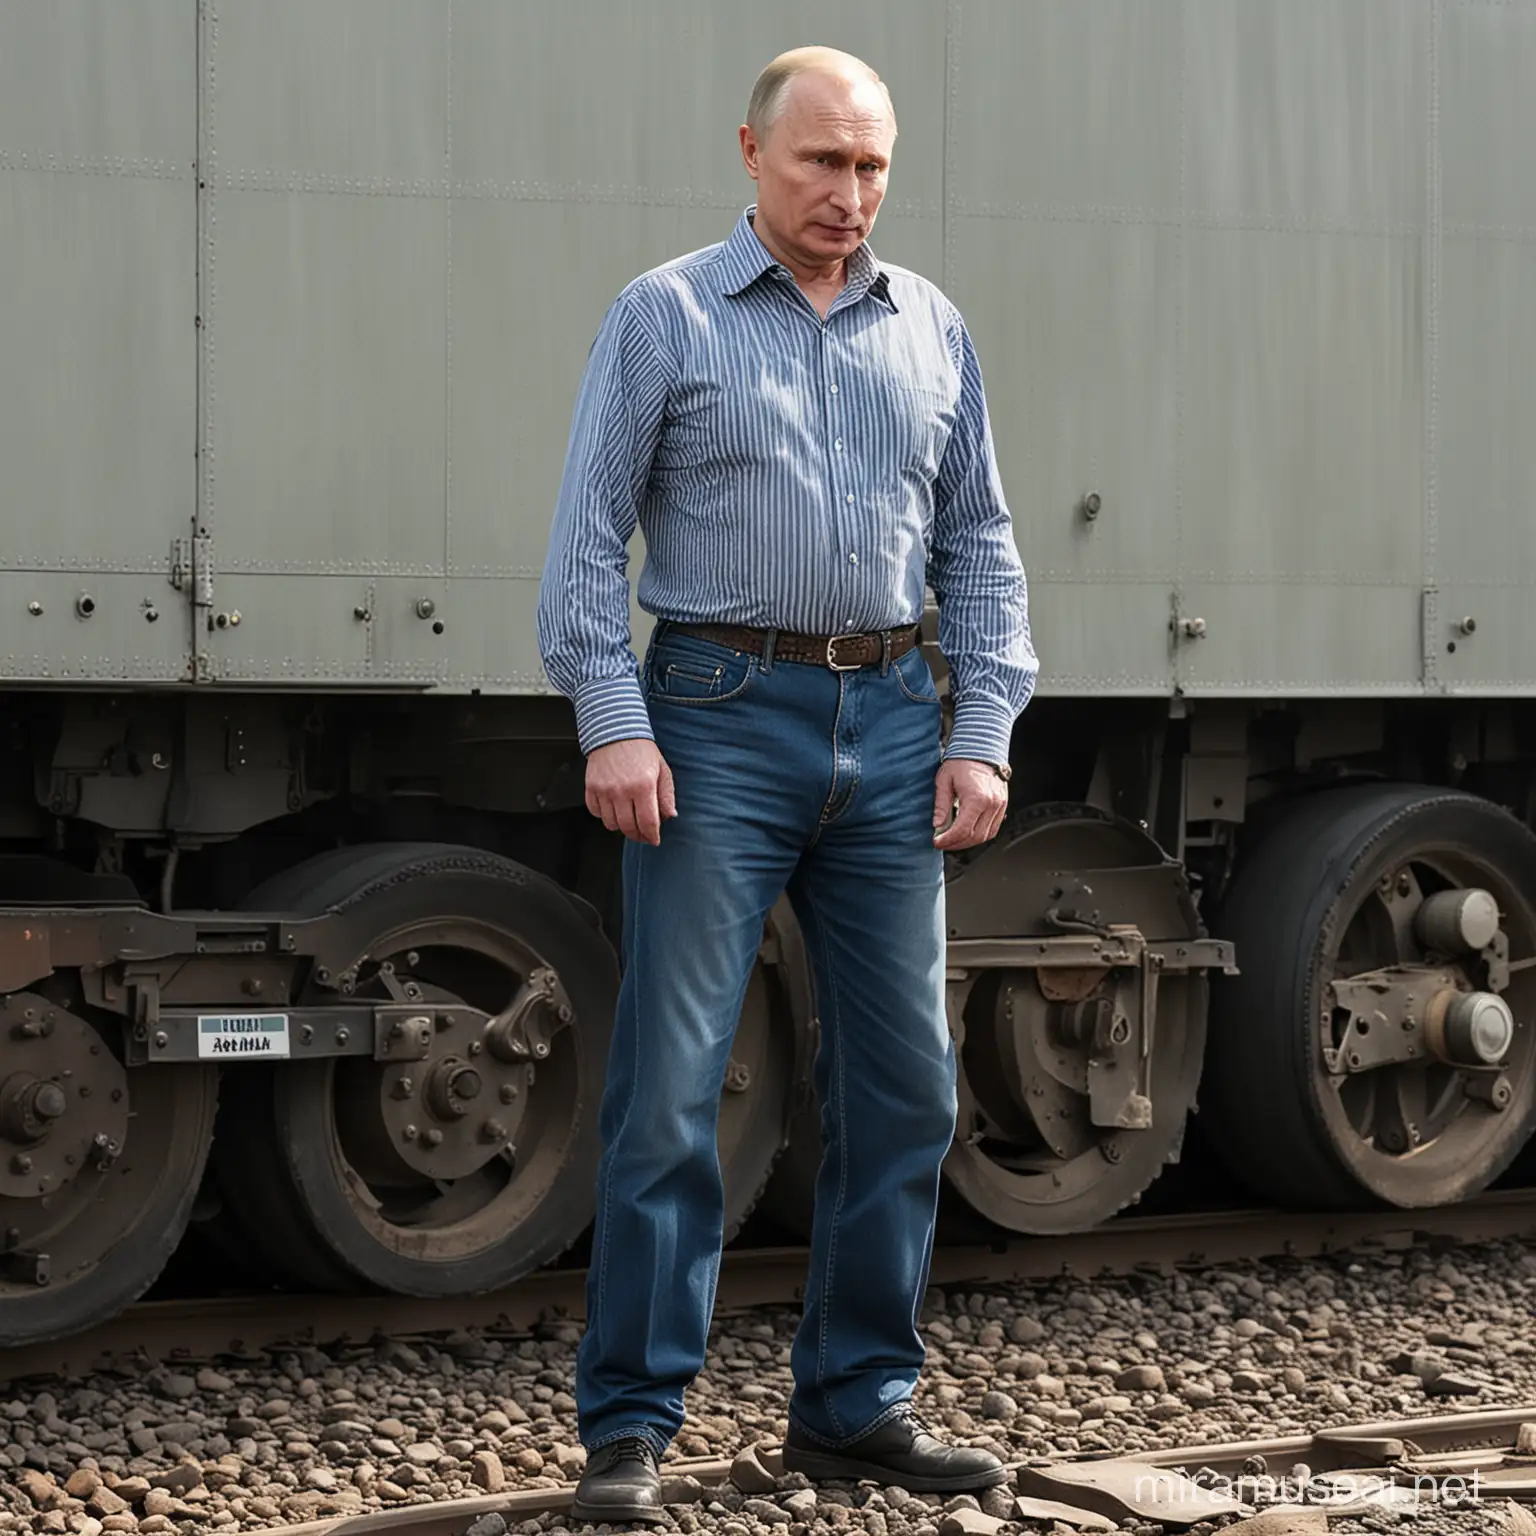 63 year real face  old Putin stands barefoot on the top of an armored train, wearing deep blue jeans and a long sleeved black and white striped shirt, receiving a green plane airdrop of vodka label liquor packaging